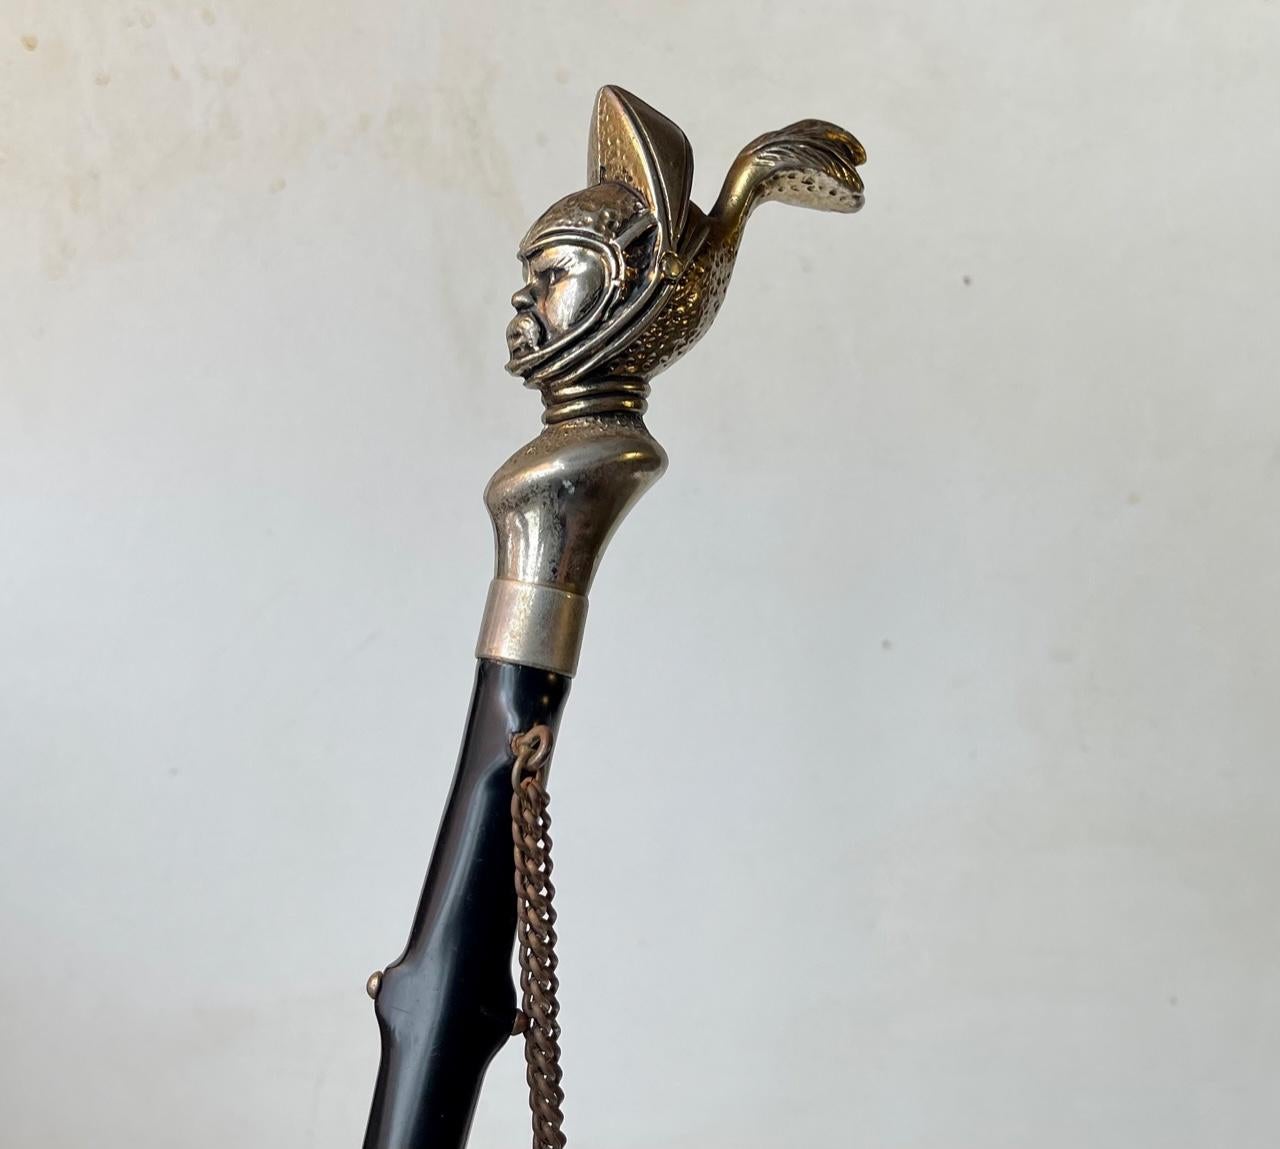 Unusual long wall hung shoe horn. Nickel plated black Knight handle set on a stylized black rod with rose thorns. European made circa 1950 - Germany. Measurements: H: 54 cm. The 'shoe horn' itself measures: 17x4x2 cm.